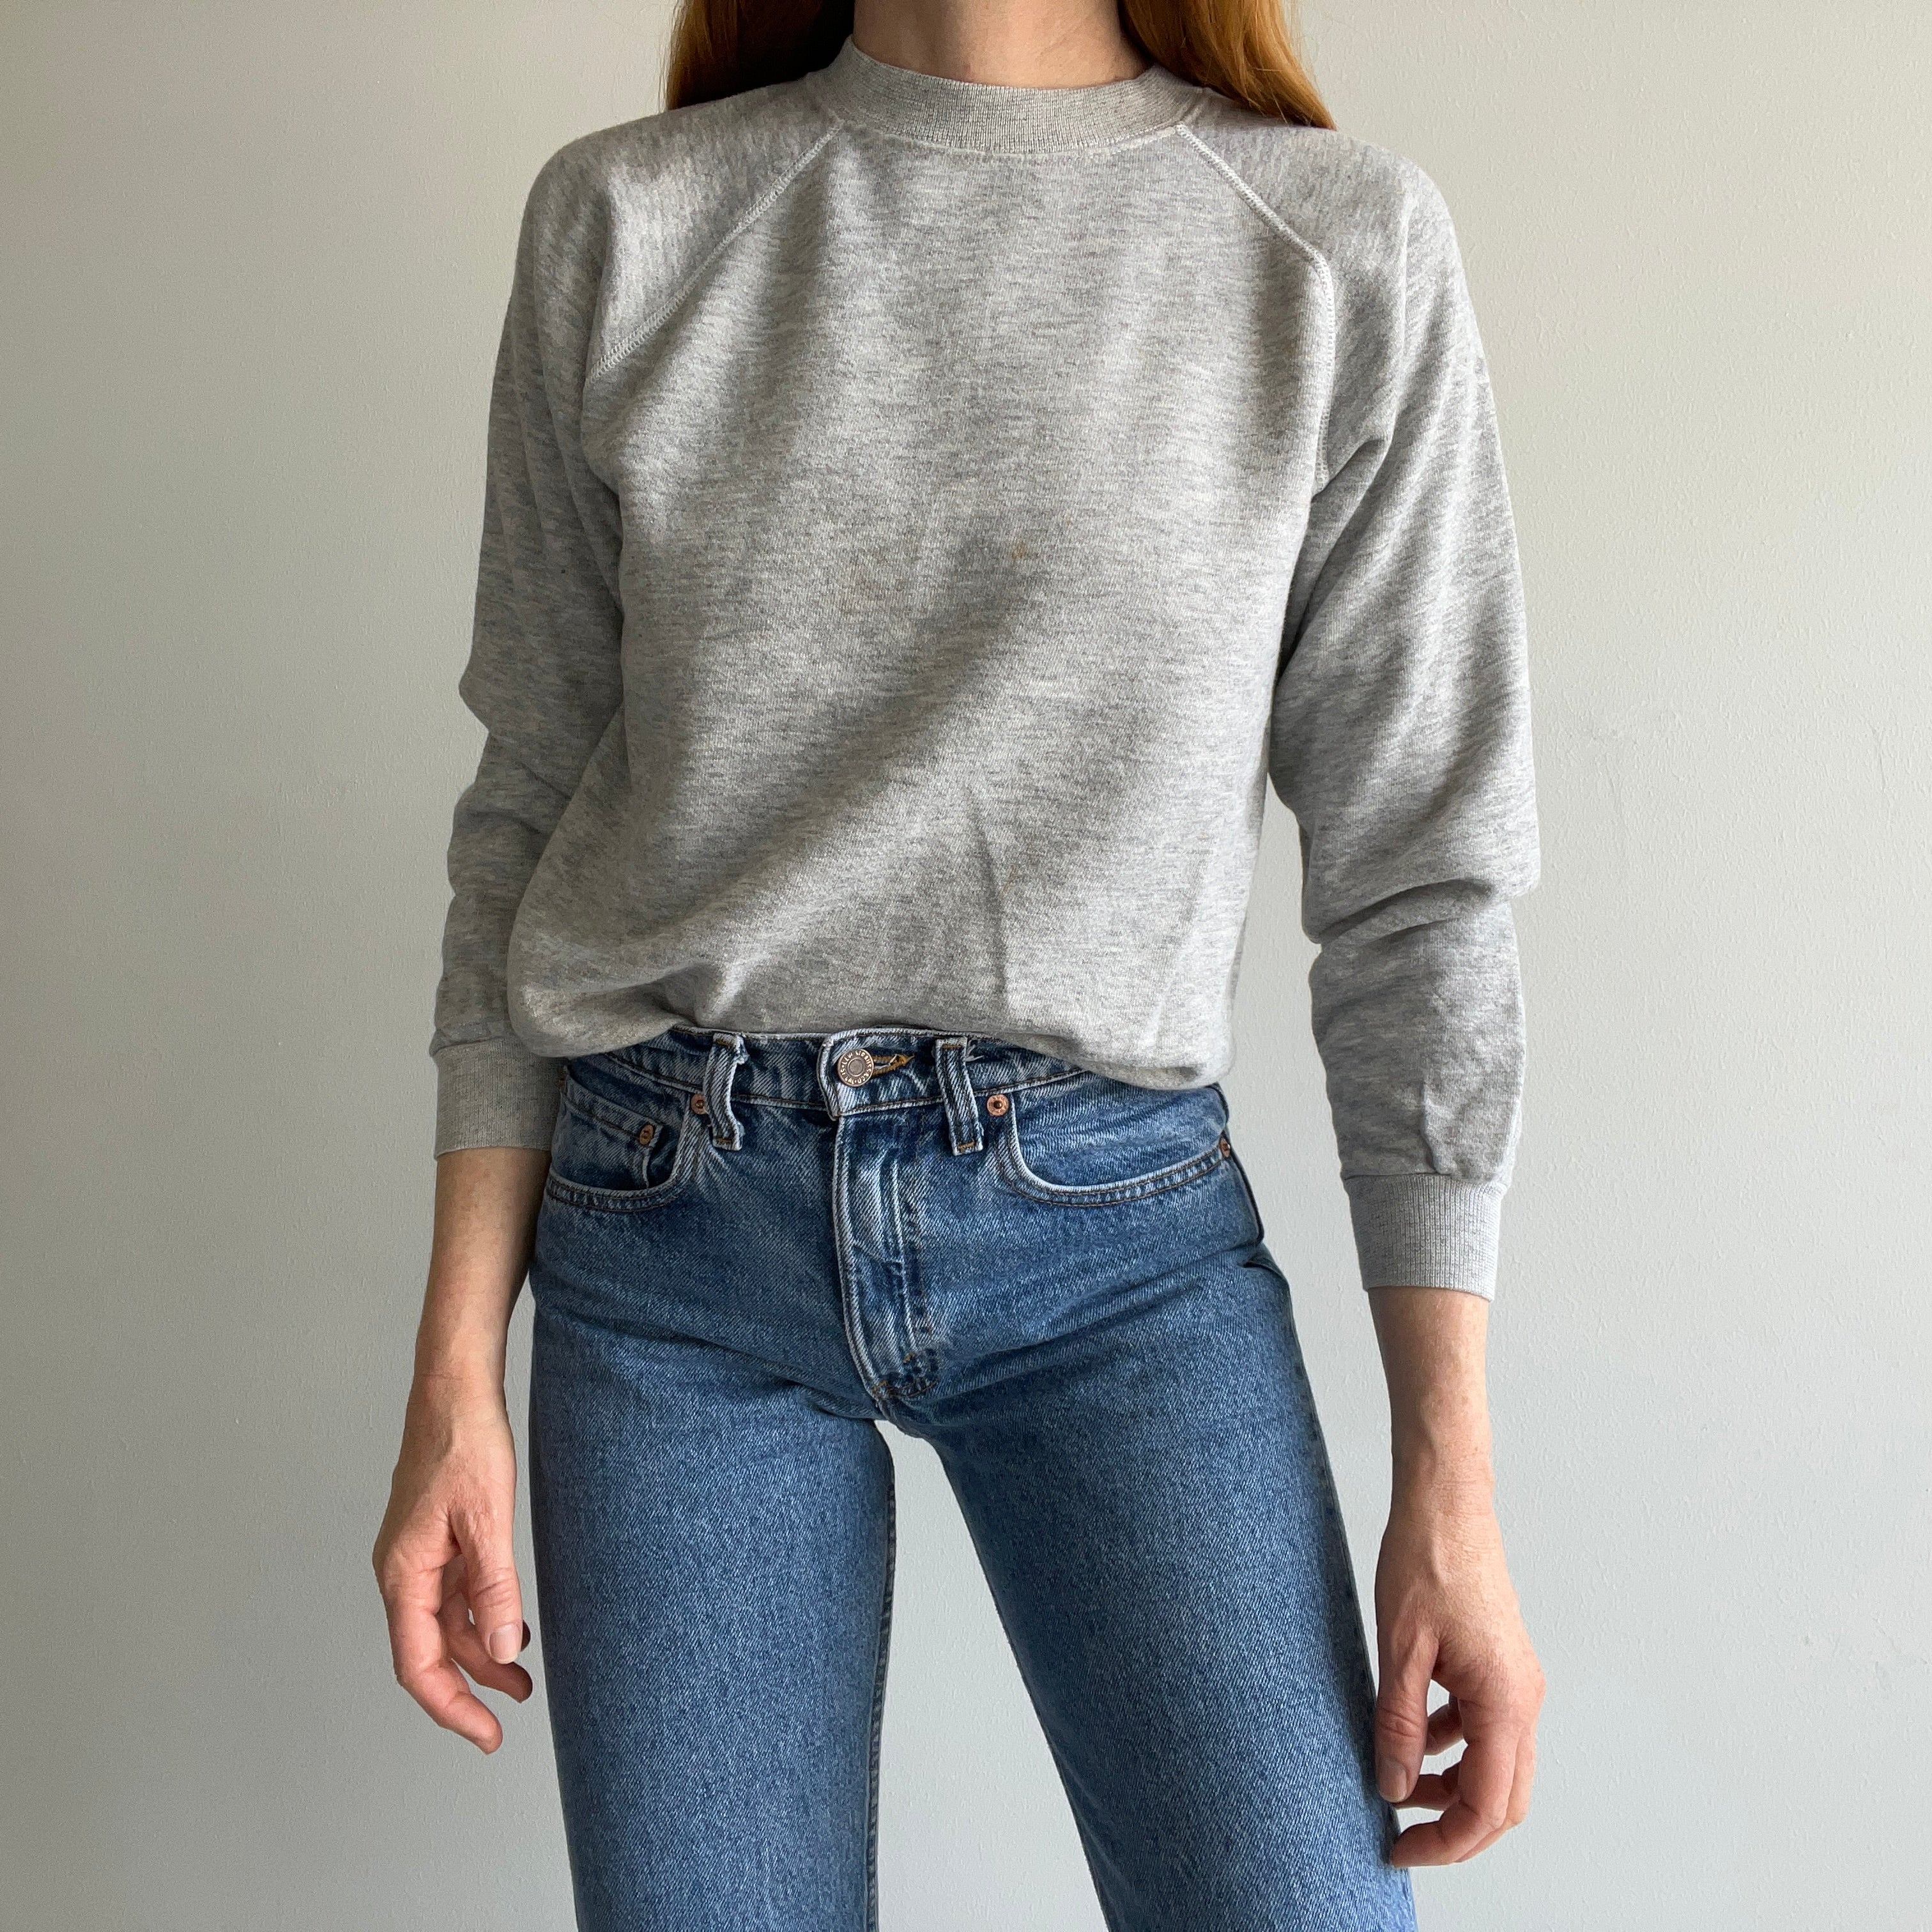 1980s Blank Gray Hanes Raglan with Contrast Stitching and Faint Rust Staining